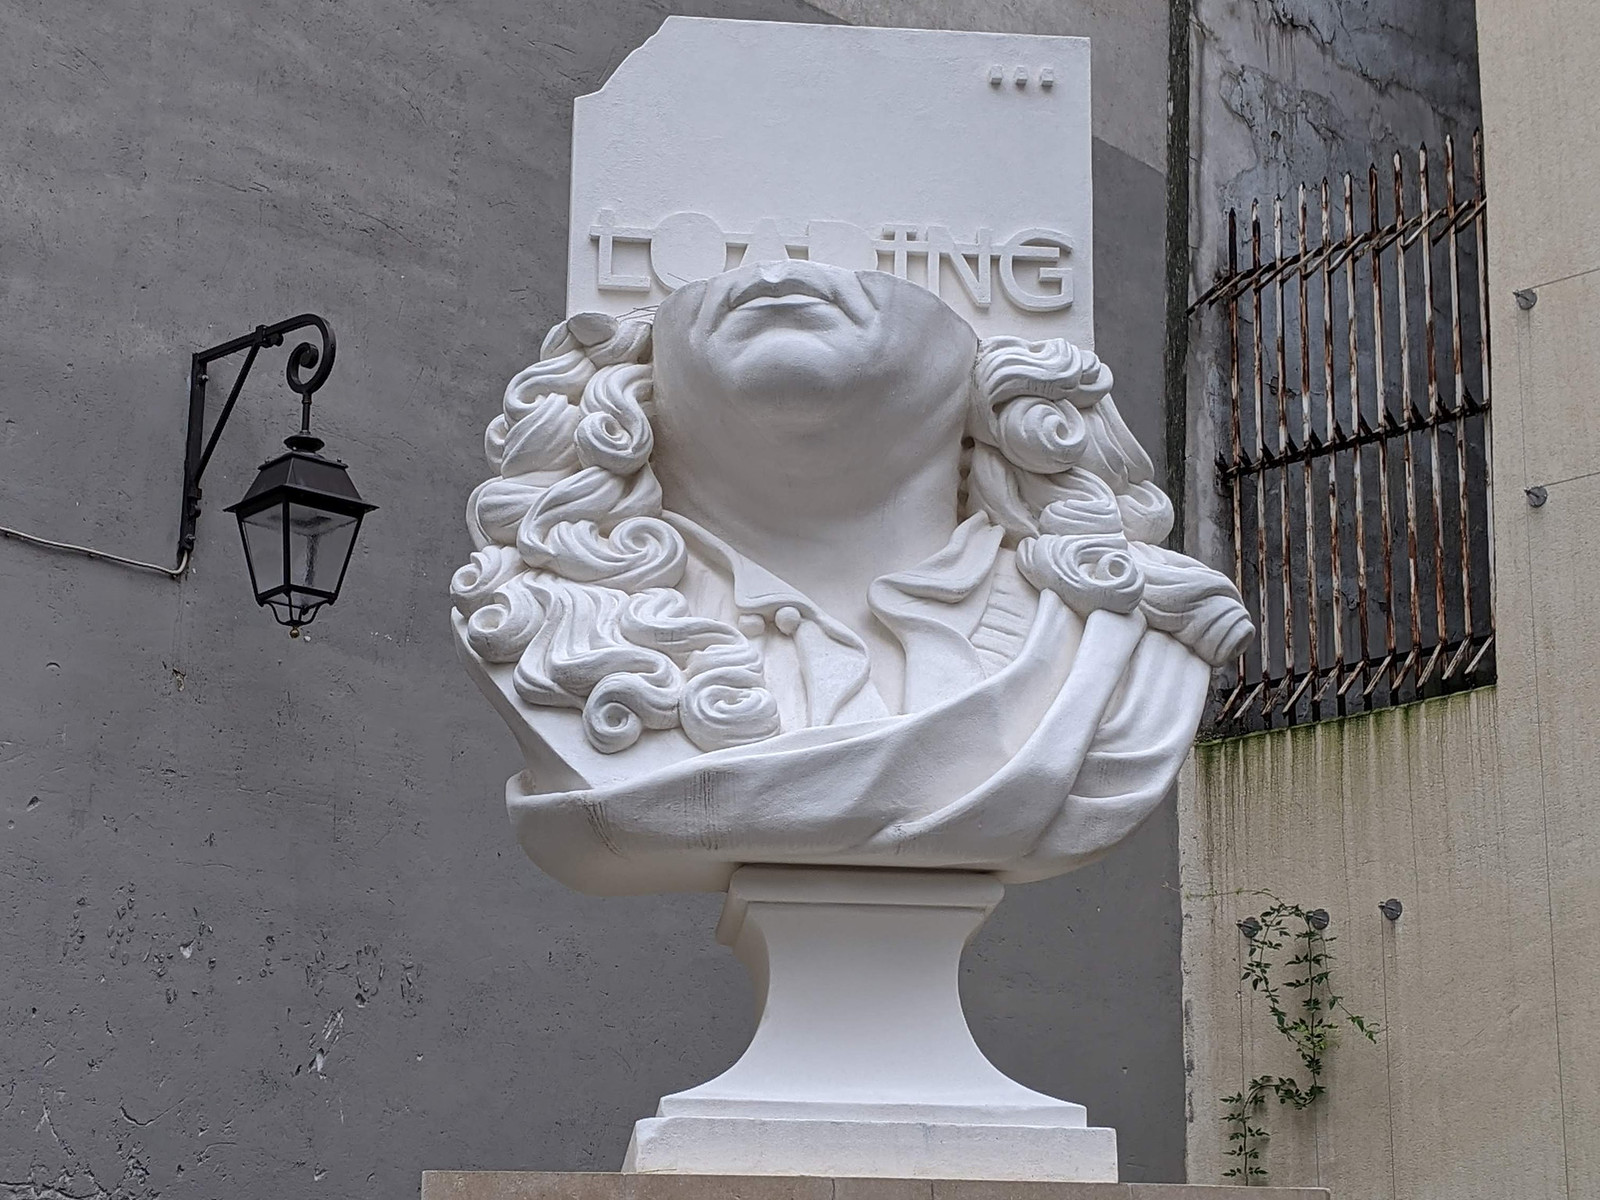 A classical white bust stands on a pedestal in front of a wall (in Paris). The top portion of the bust is replaced by the top of the document ison from a computer, with the word "LOADING" written on it